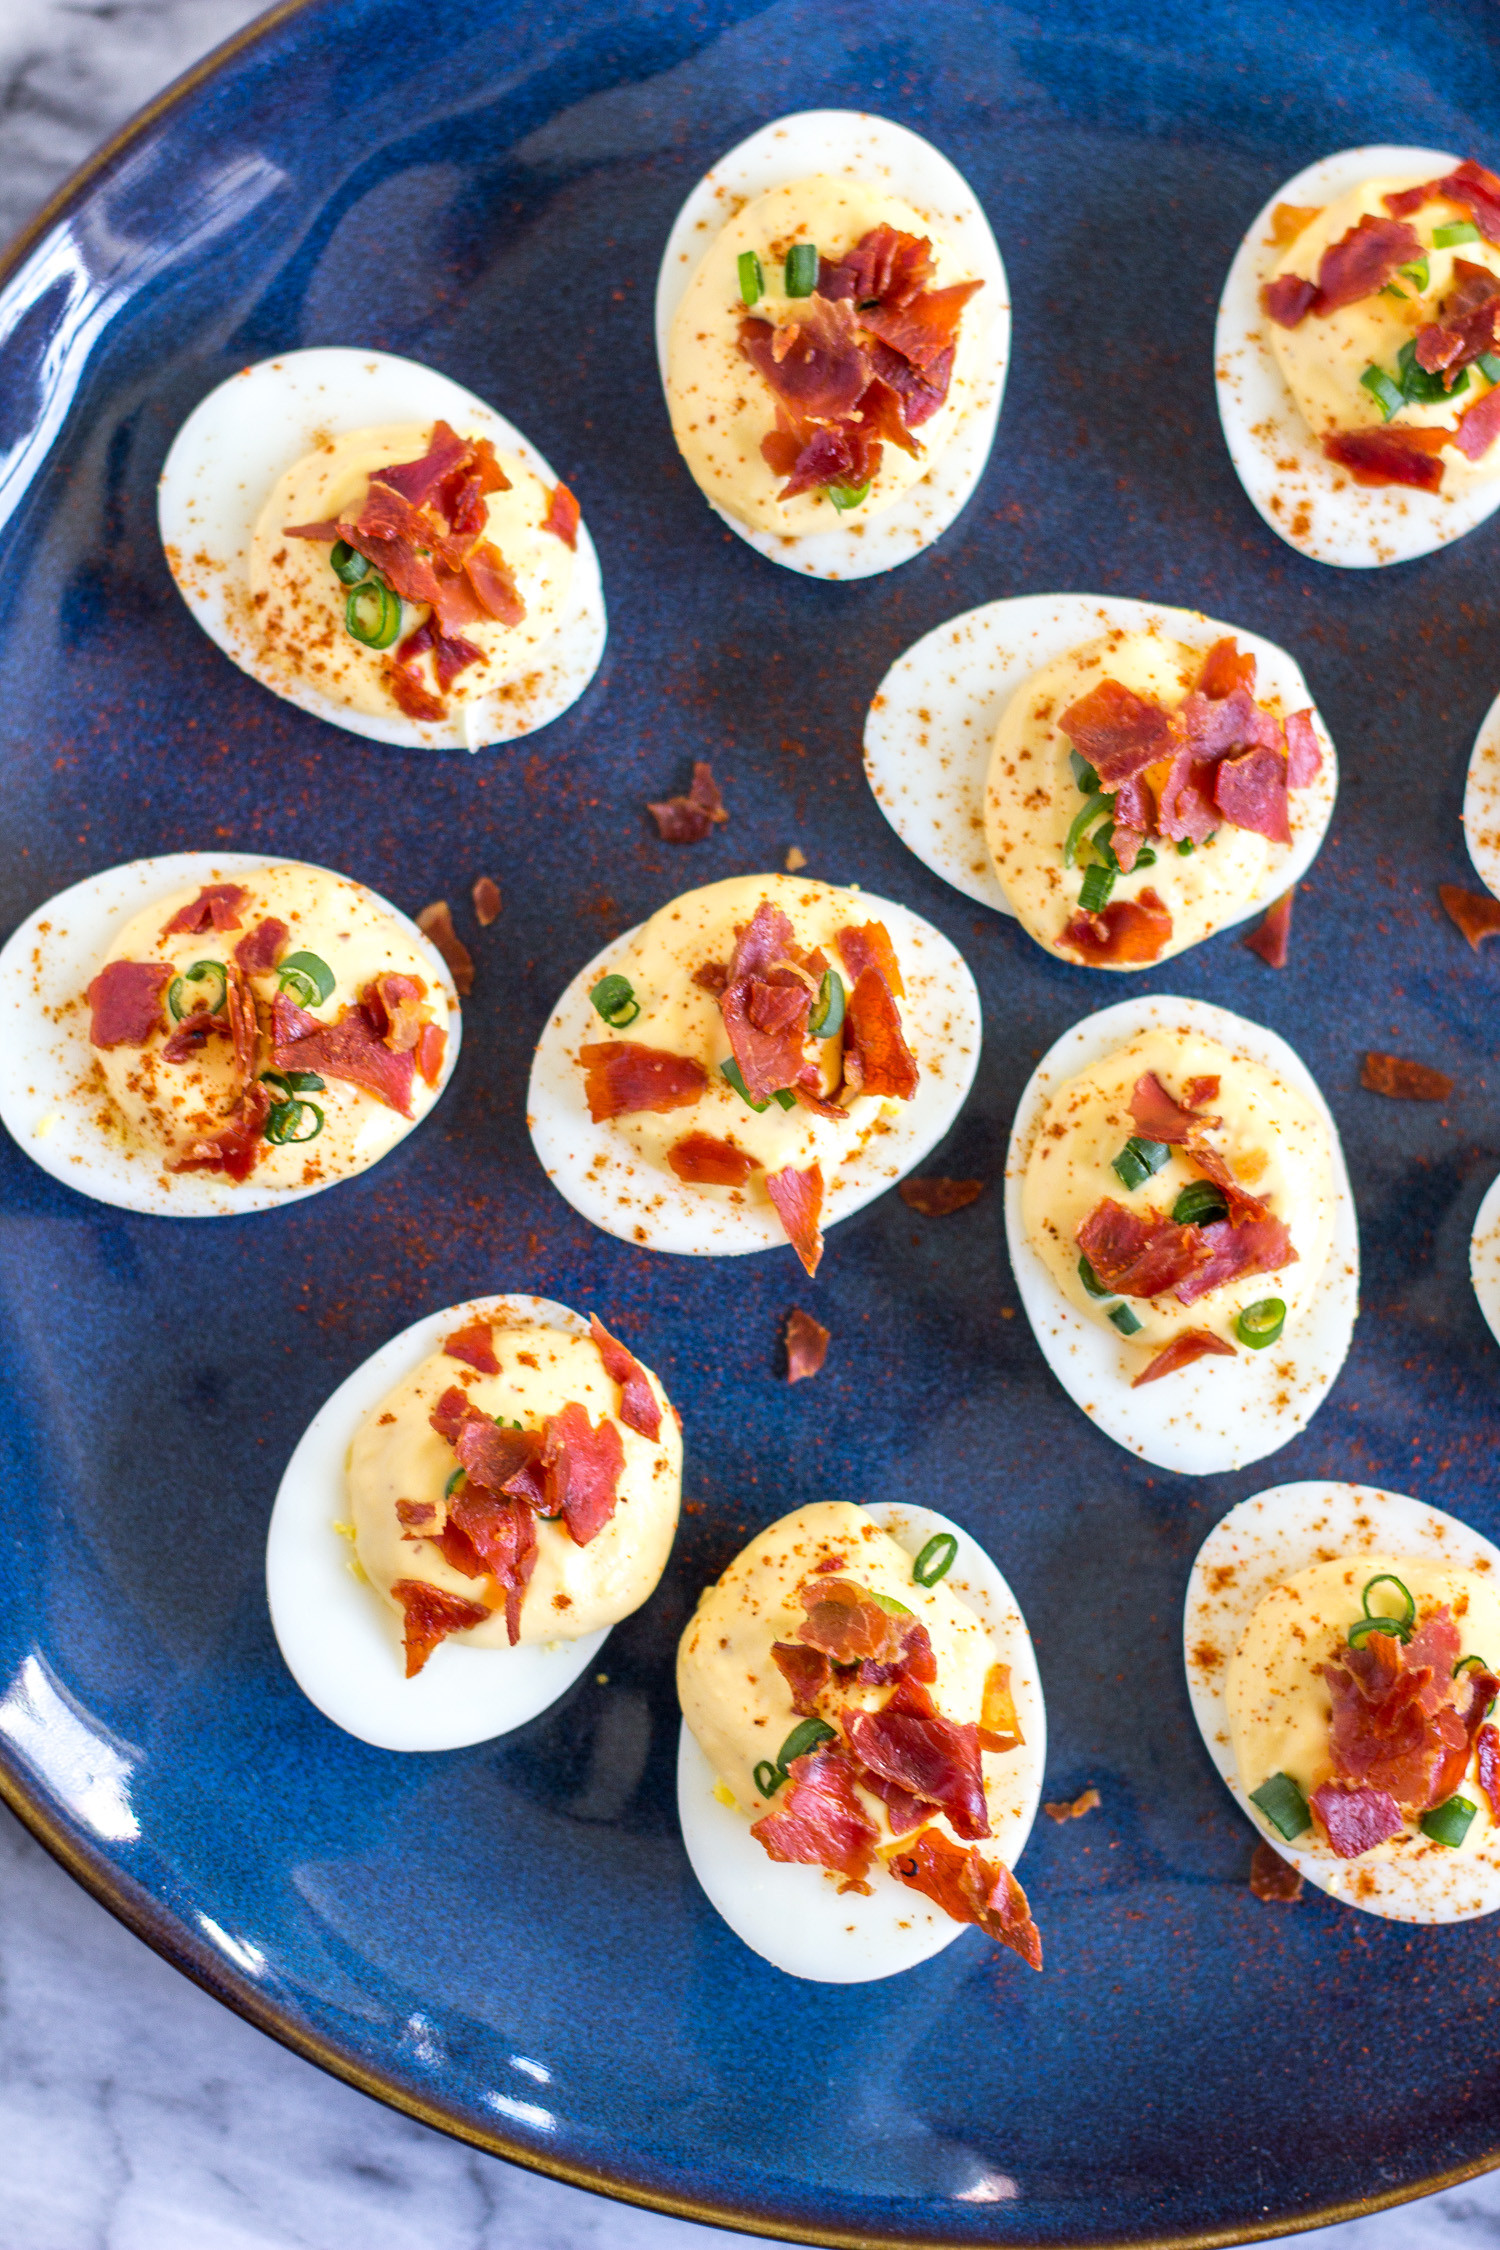 Recipe Deviled Eggs
 The Best Deviled Egg Recipe The Perfect Appetizer for Easter